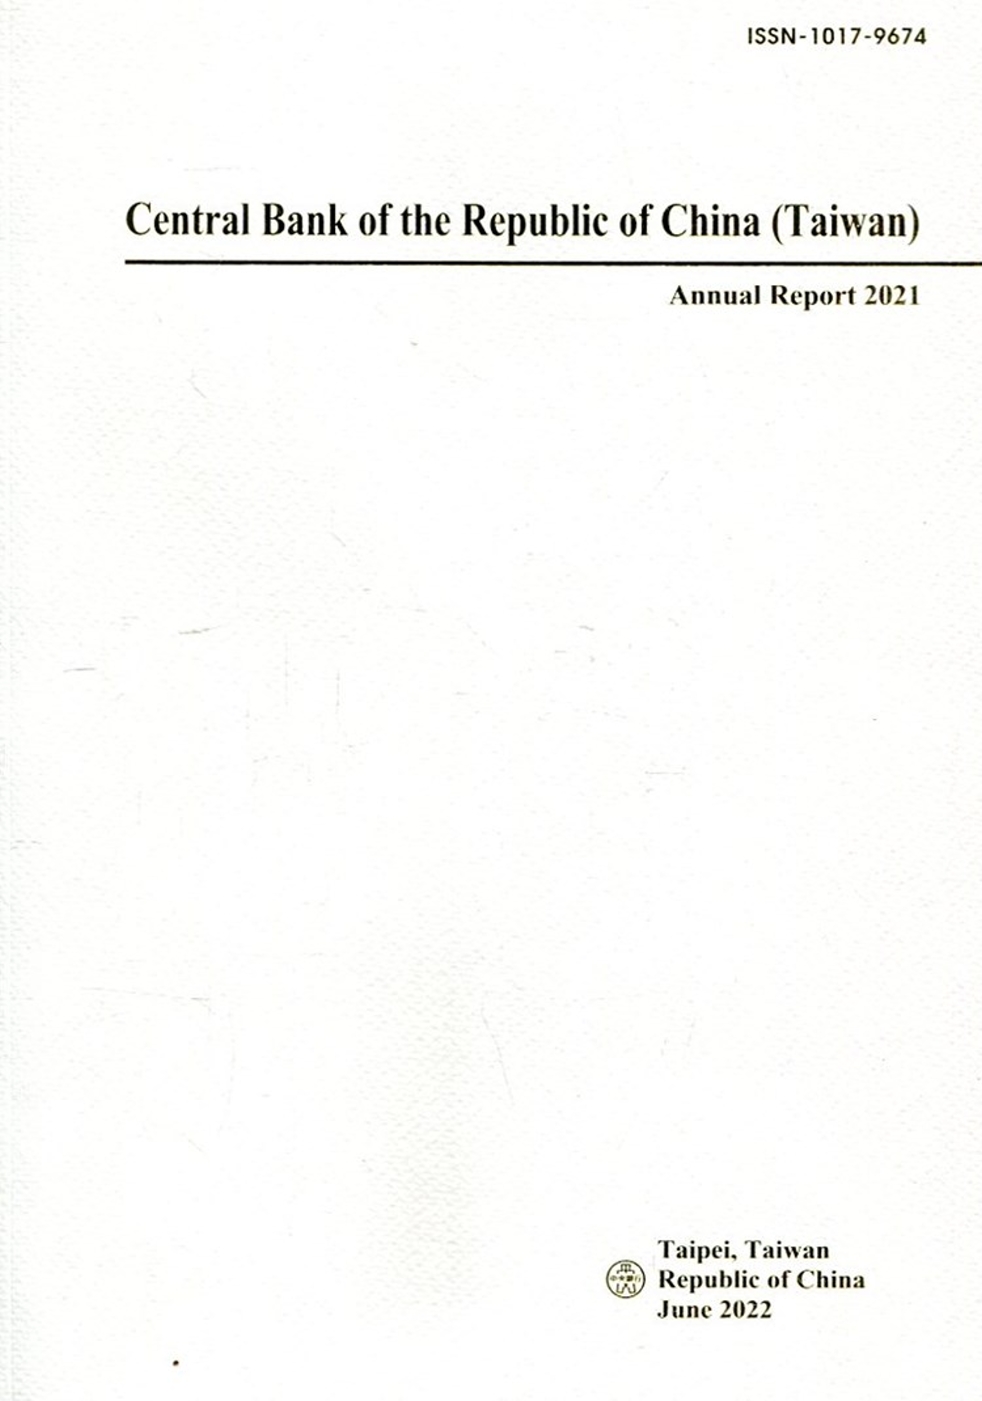 Annual Report,The Central Bank of China 2021